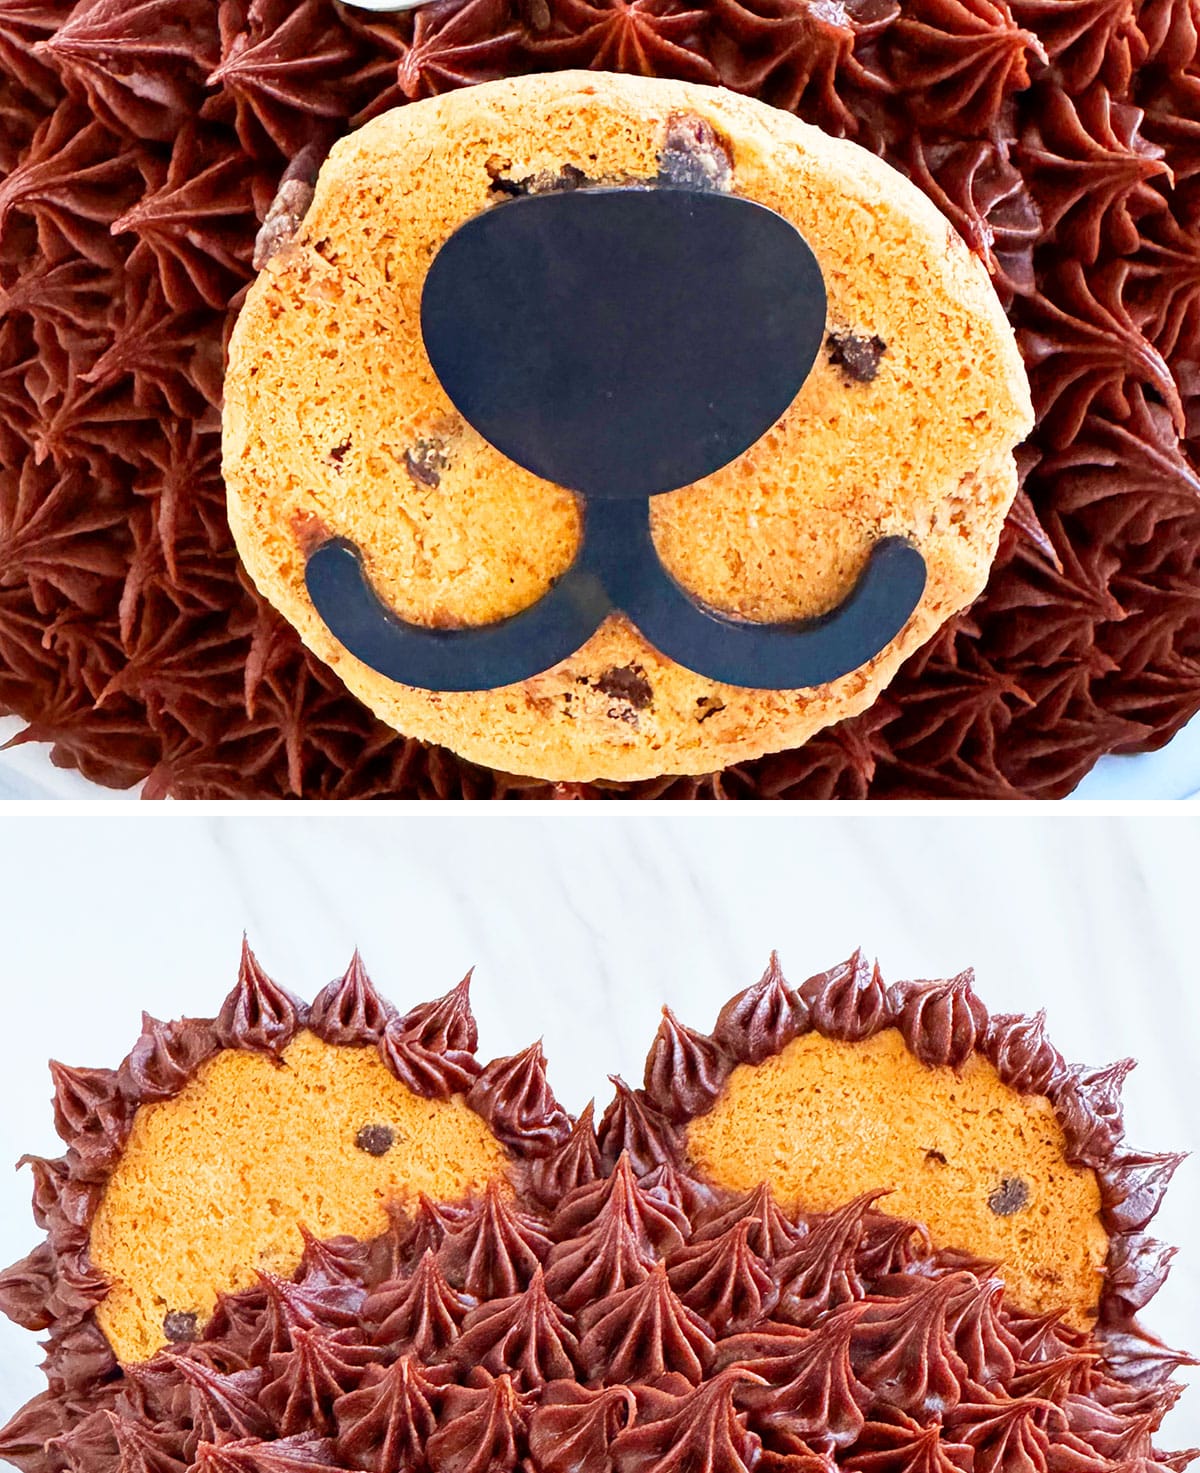 Collage Image With Closeup Shots of Cake Details.  